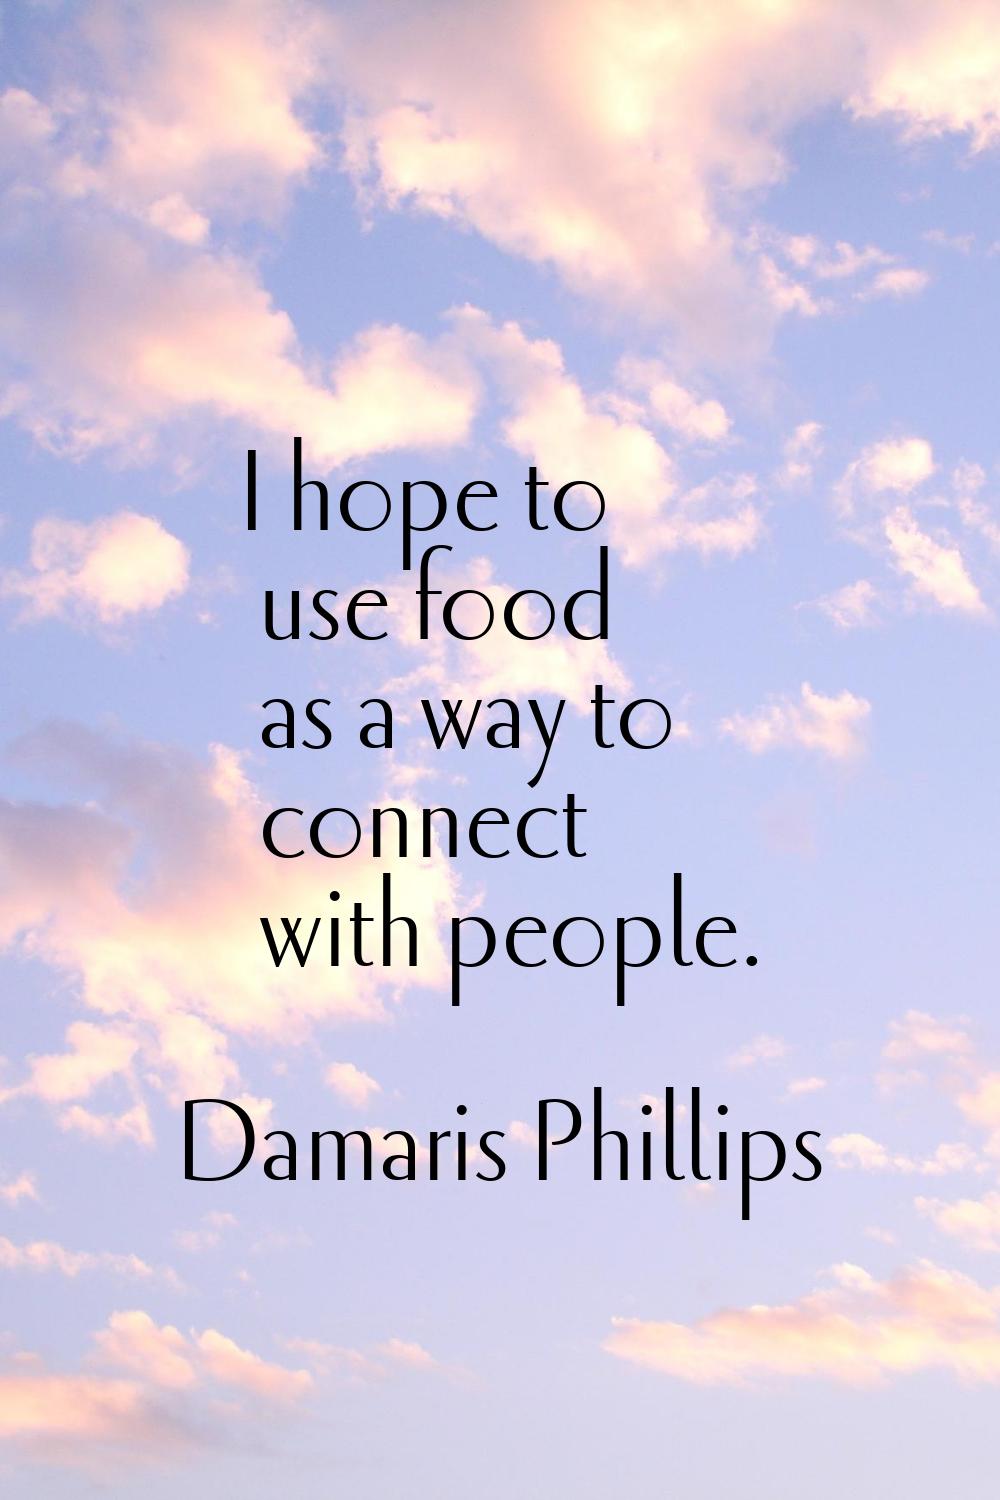 I hope to use food as a way to connect with people.